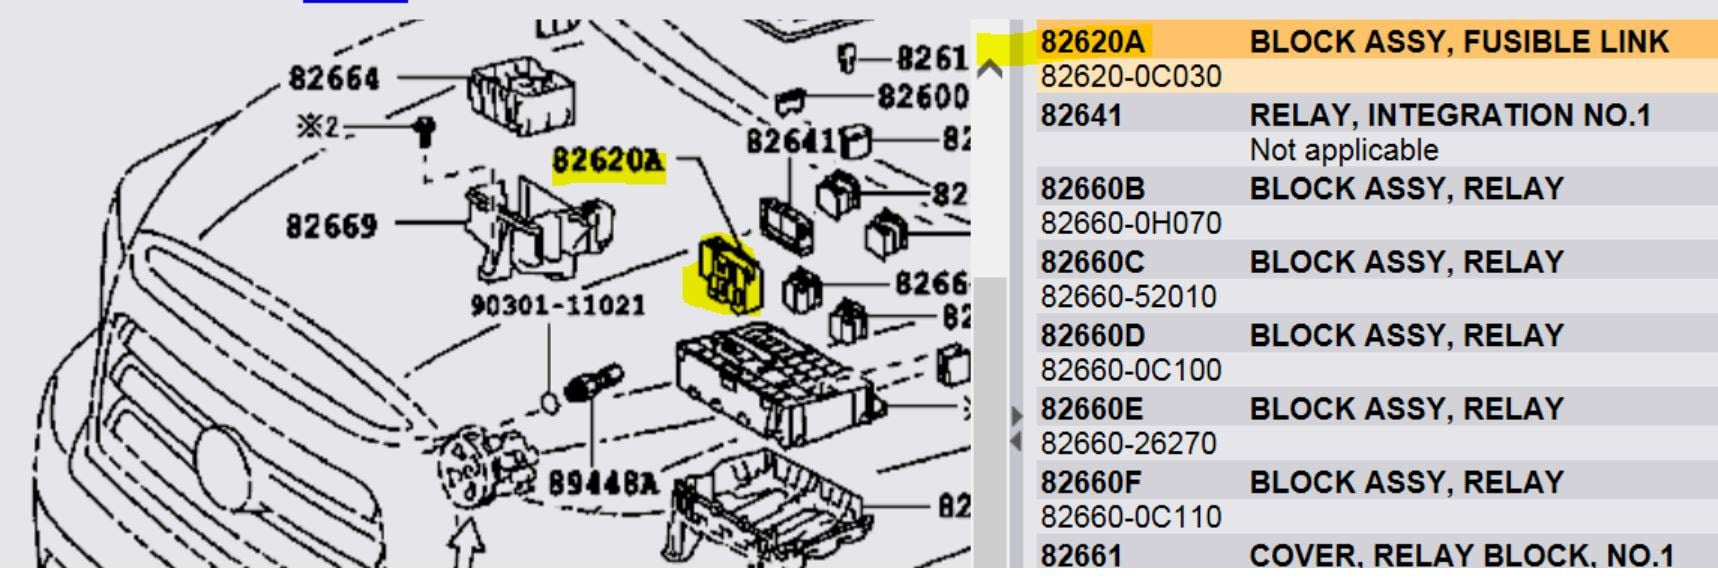 Circuit Electric For Guide: 2007 toyota tacoma fuse diagram